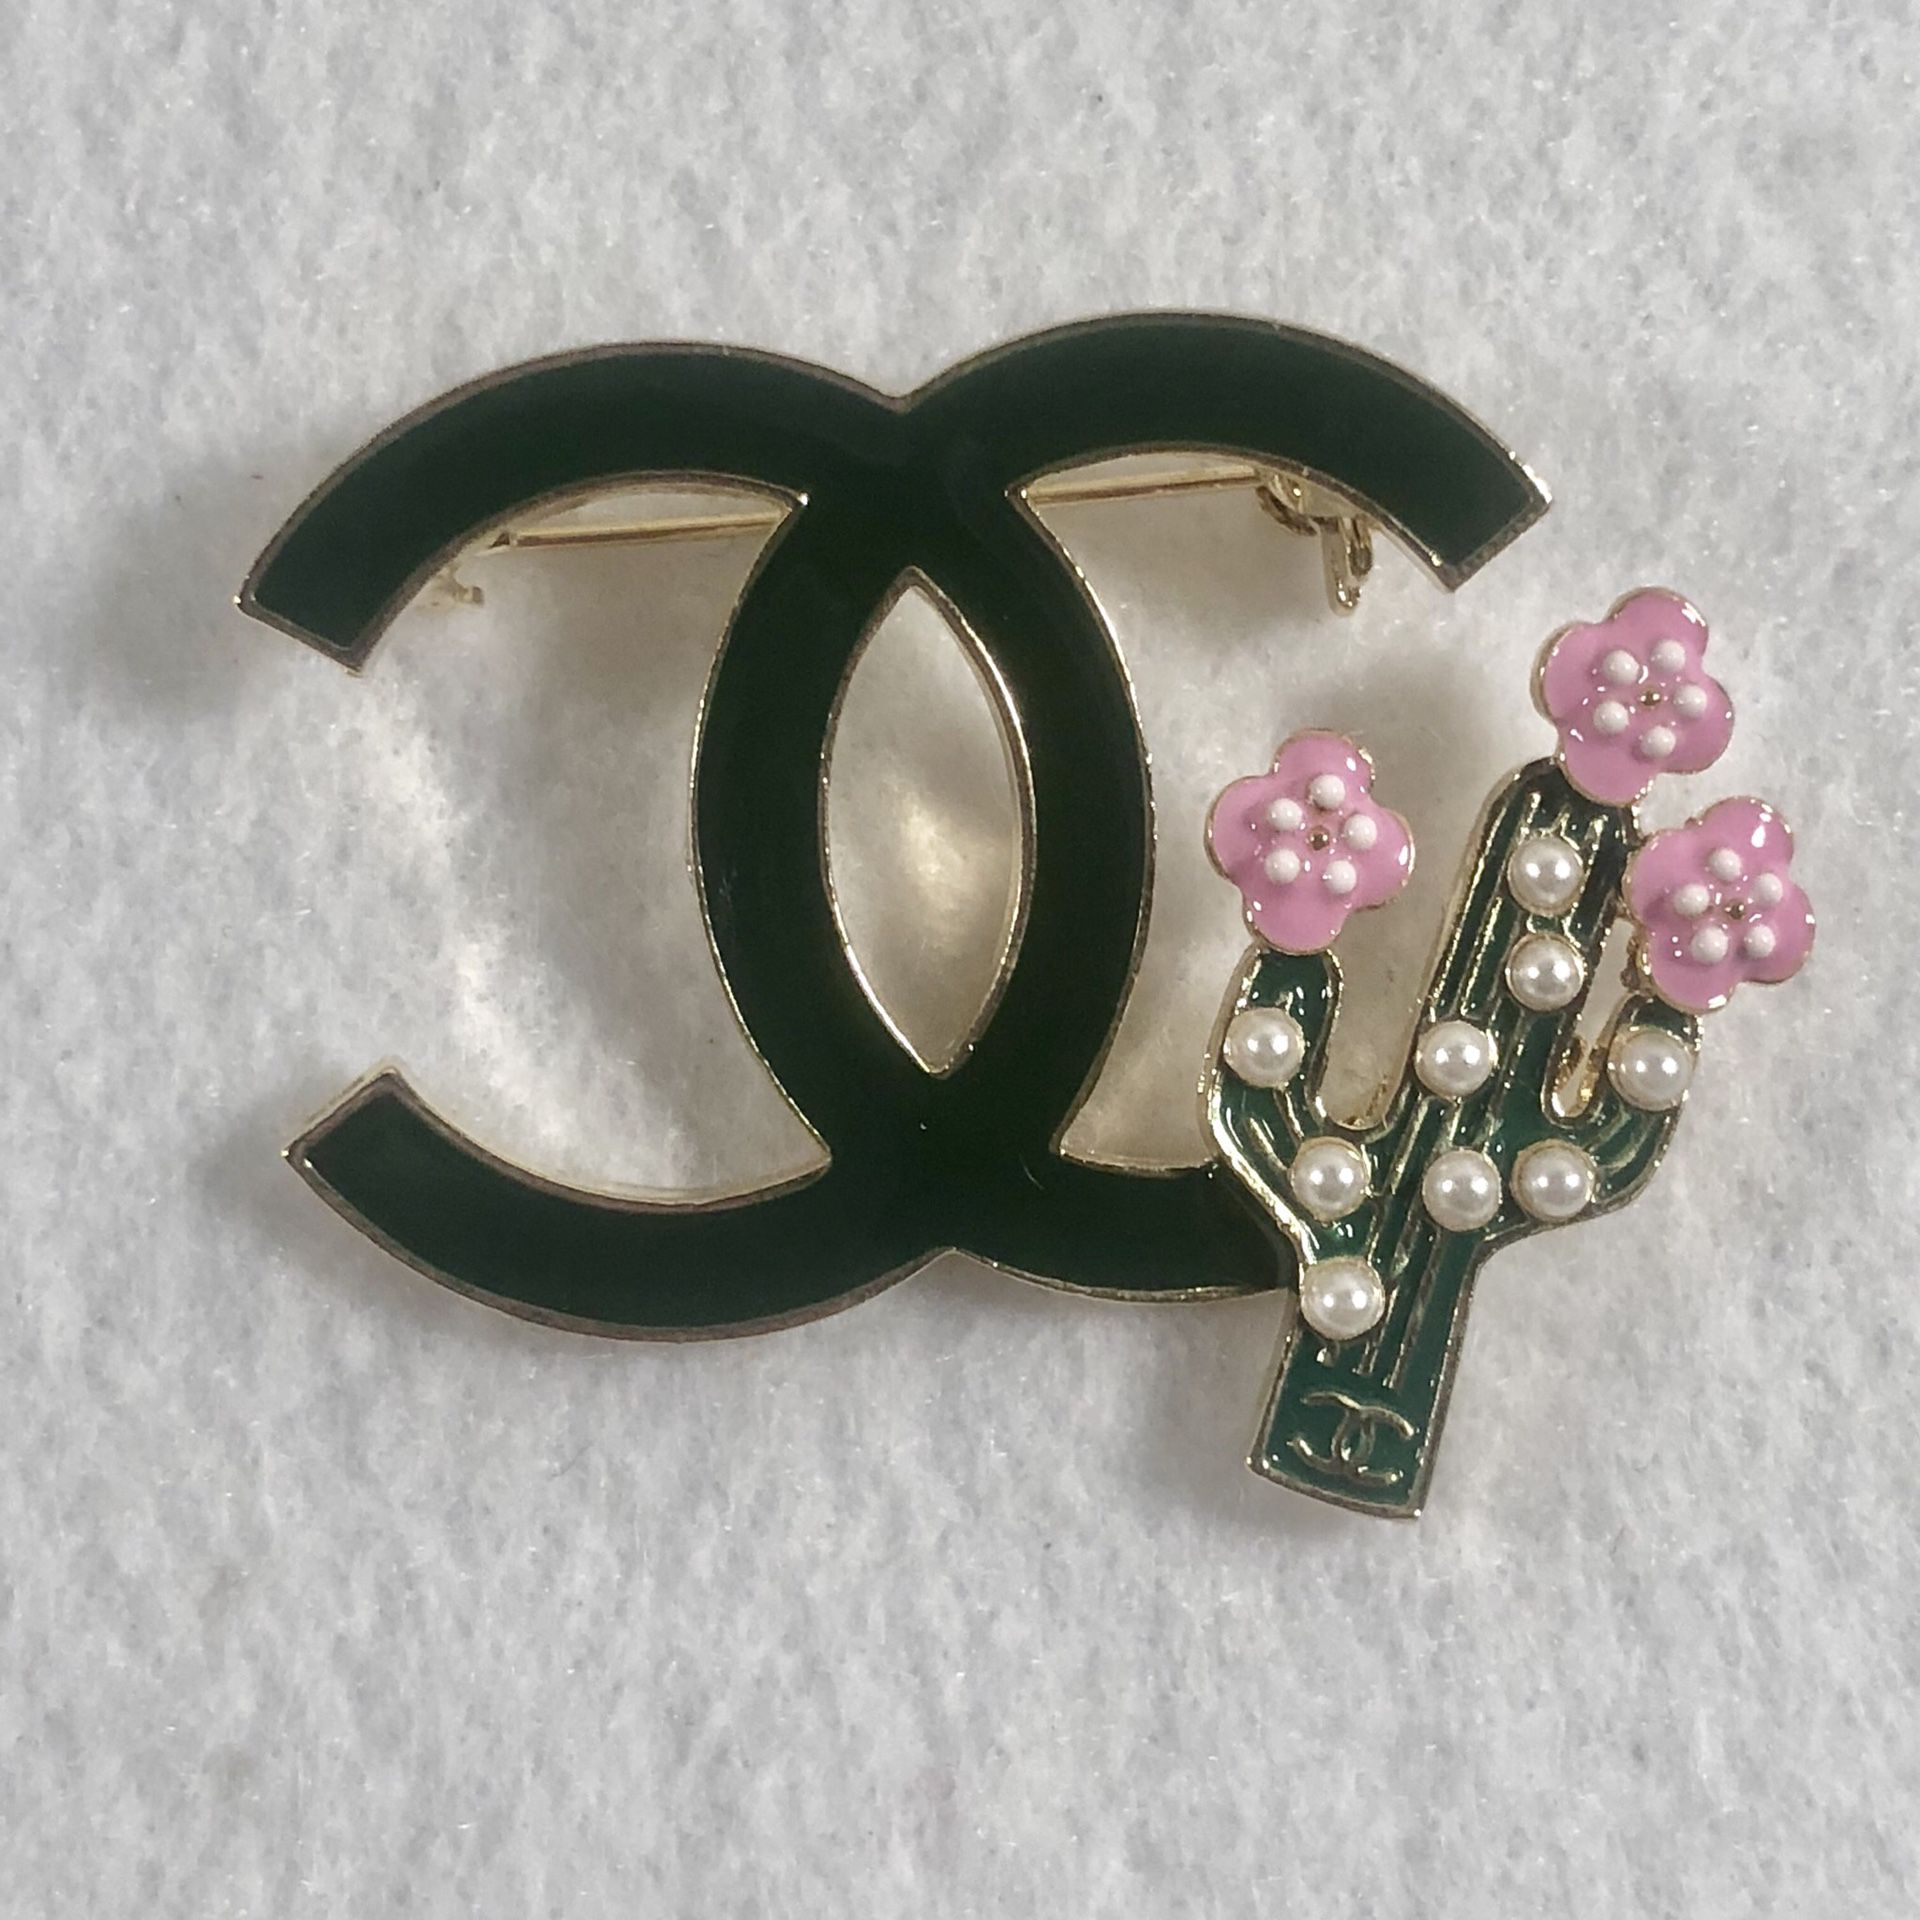 Chanel Brooch CC Cactus Jewelry for Sale in Fort Myers, FL - OfferUp